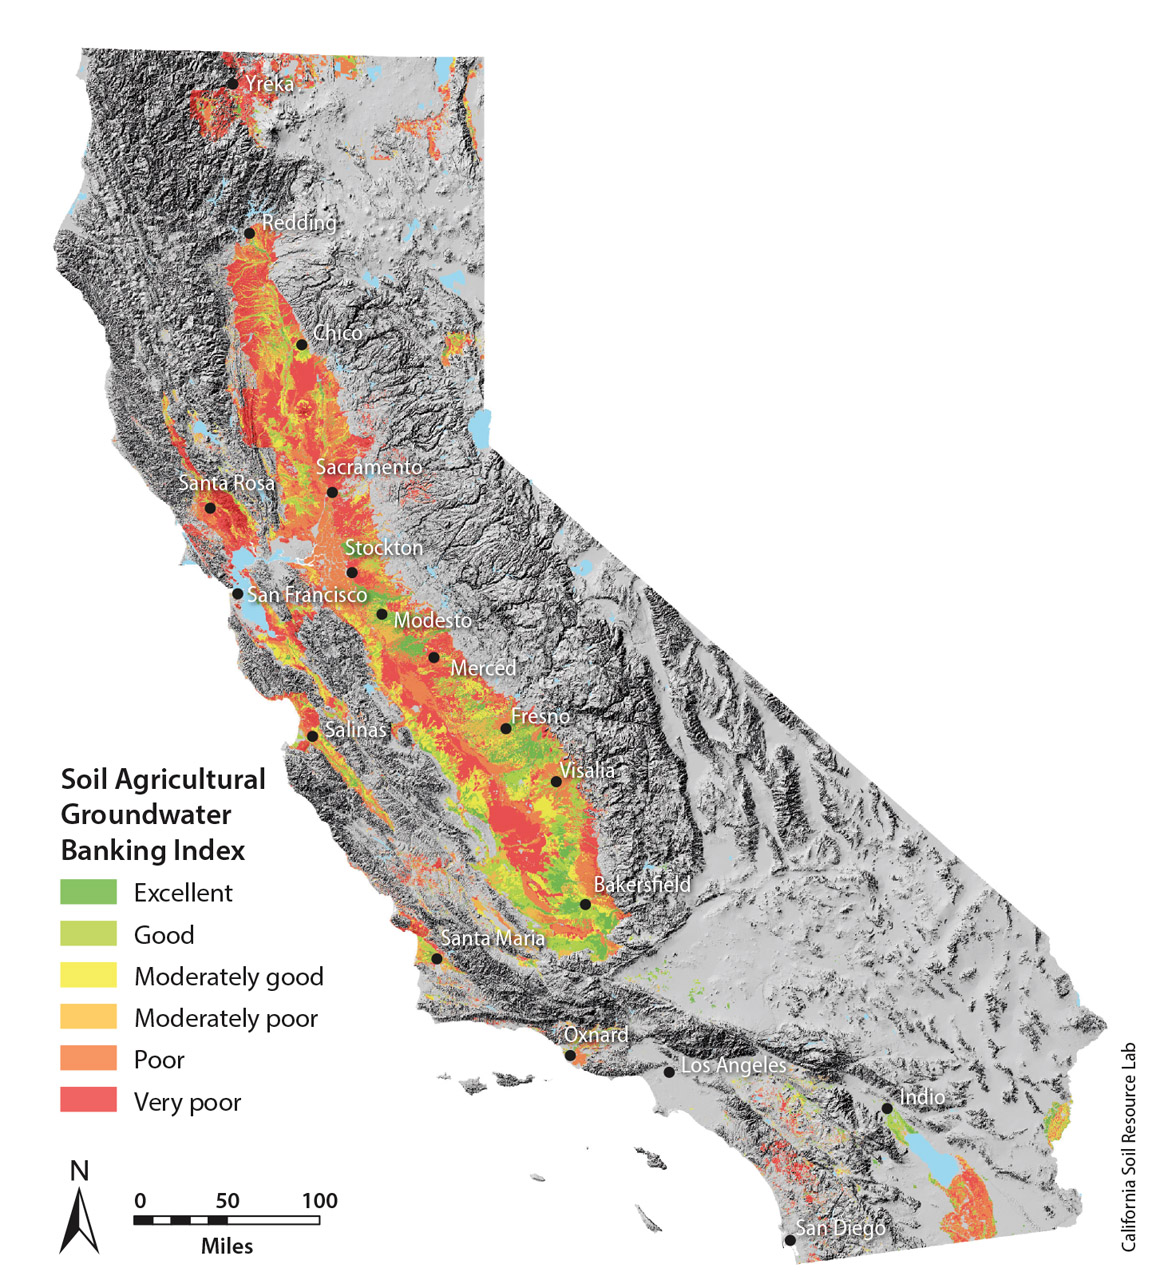 Spatial extent of Soil Agricultural Groundwater Banking Index suitability groups accounting for modifications by deep tillage.